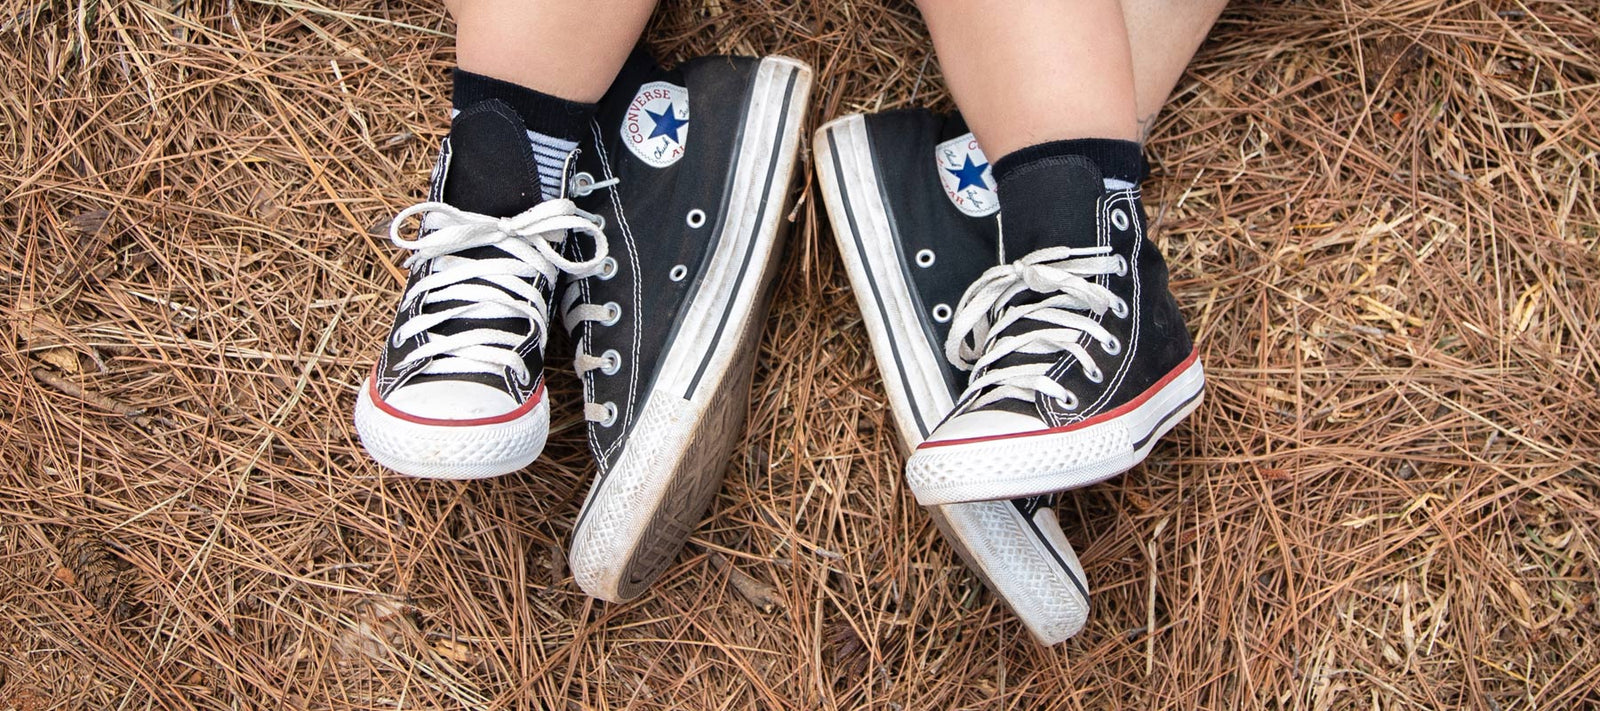 Bump Shoes  Personalised & Custom Converse Chuck Taylor Shoes